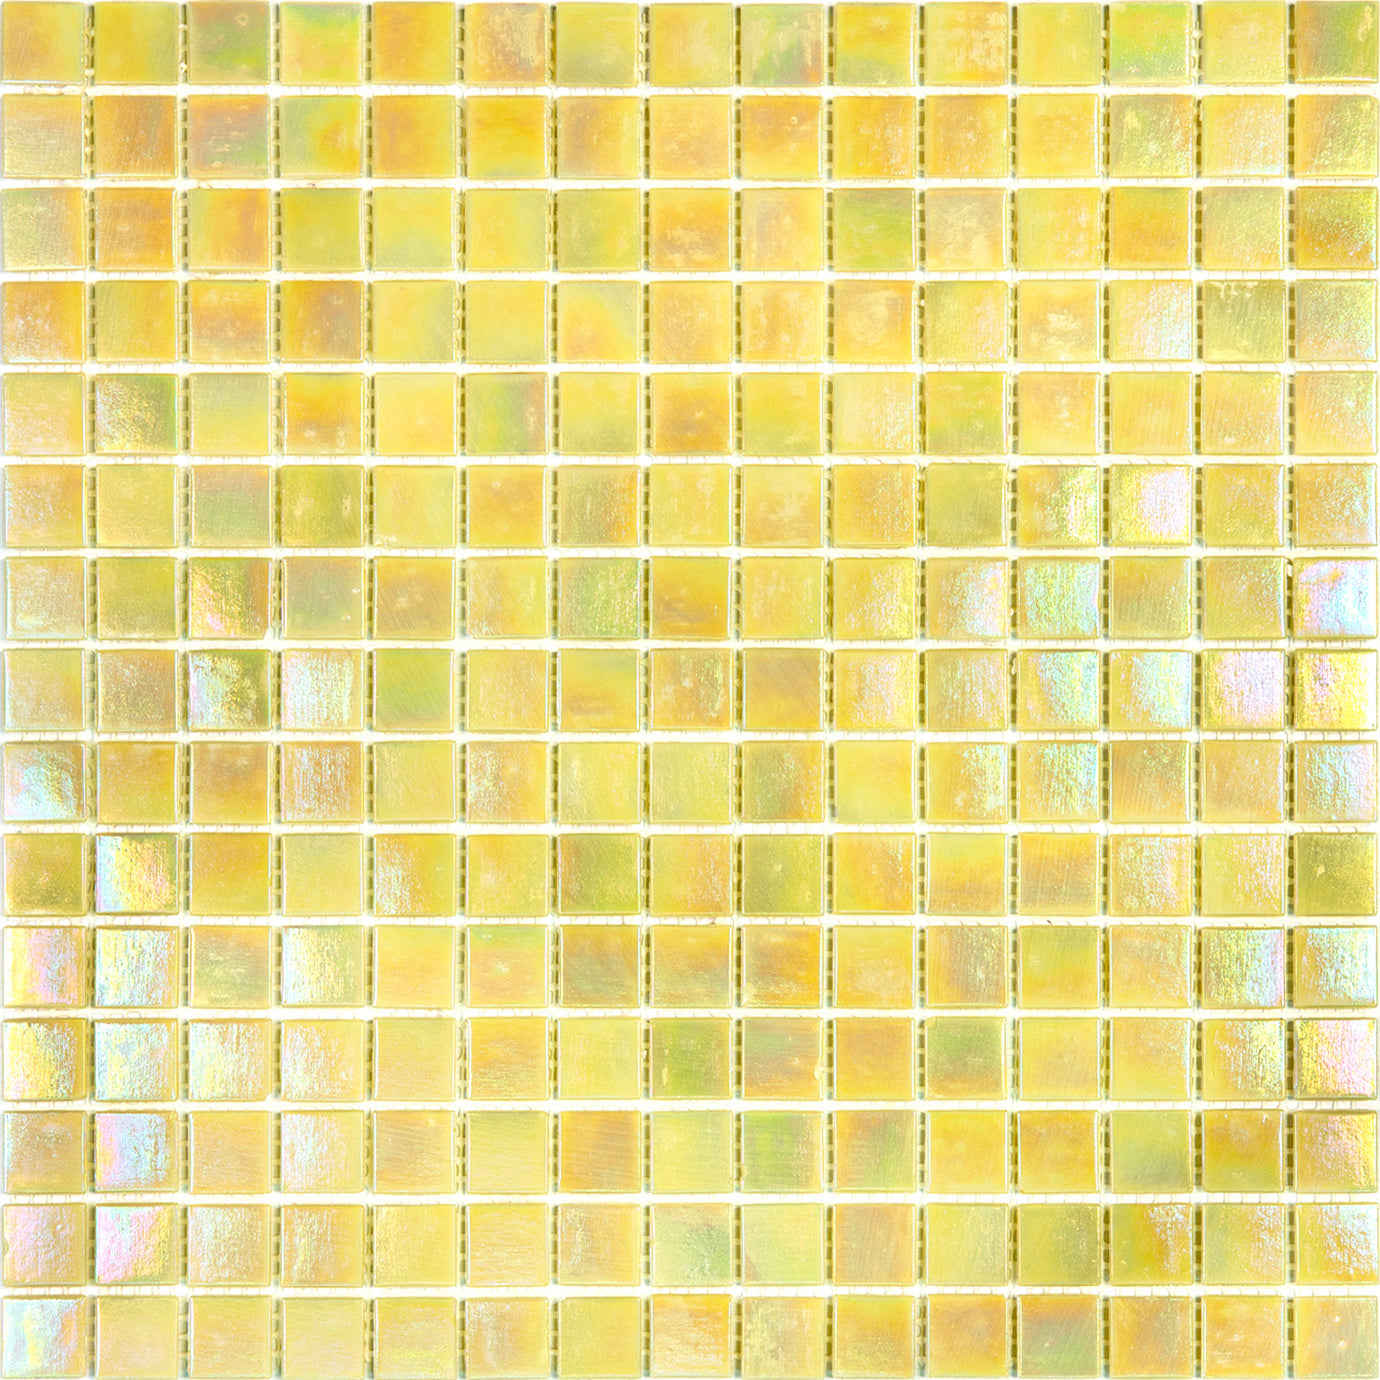 mir alma solid colors 0_8 inch pearly pe37 wall and floor mosaic distributed by surface group natural materials